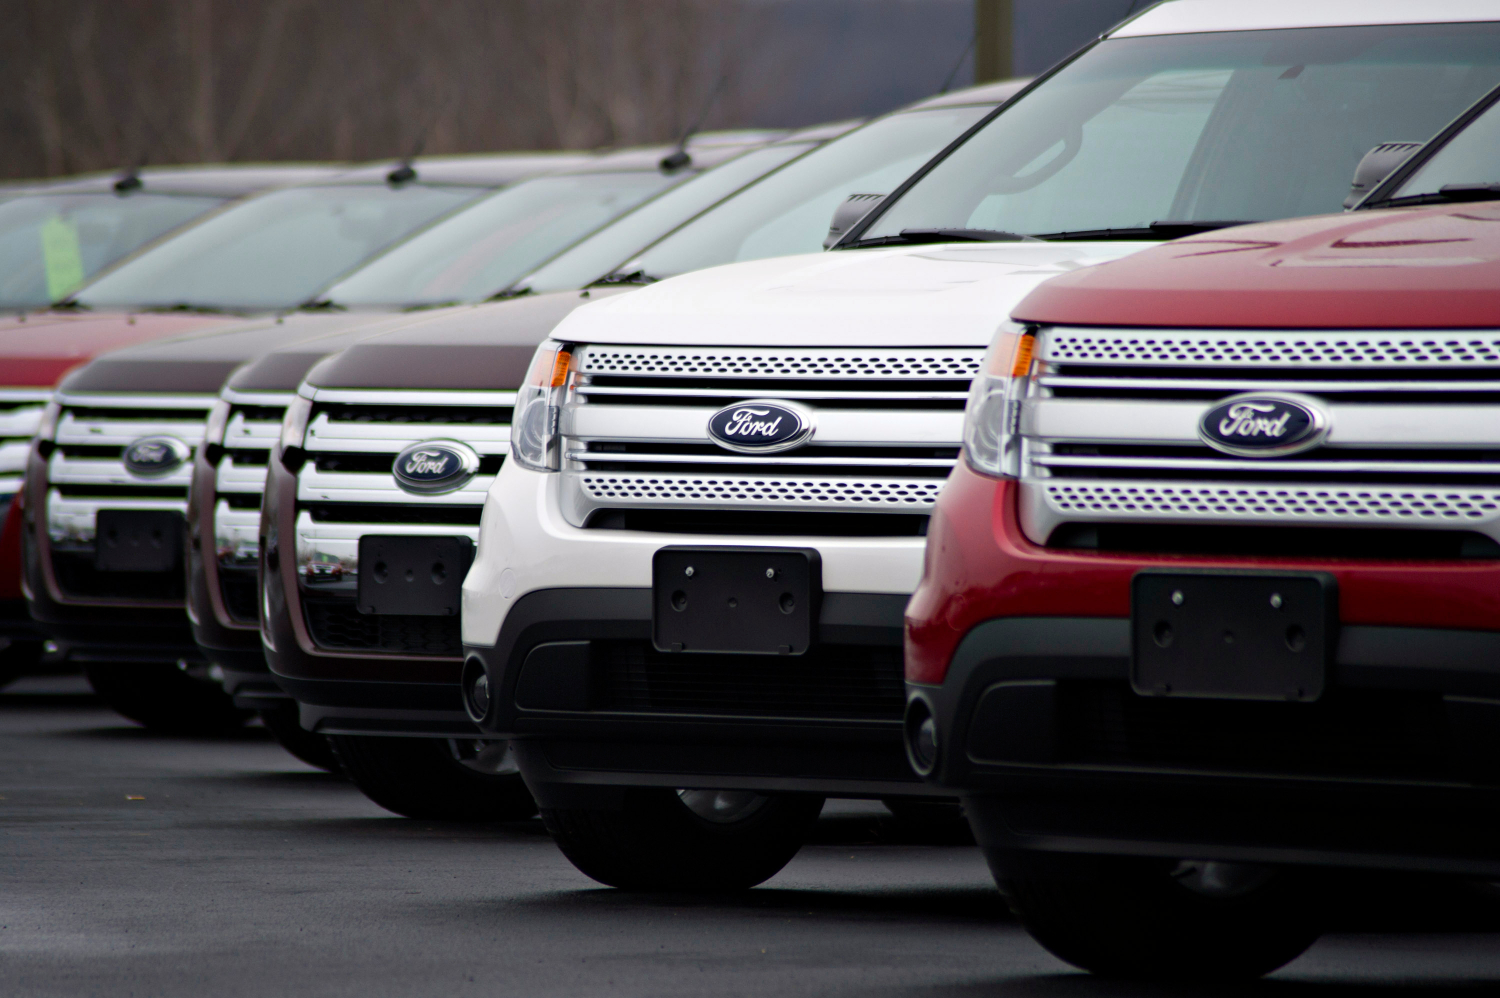 The best used Ford Explorer SUV years like these 2012 SUVs